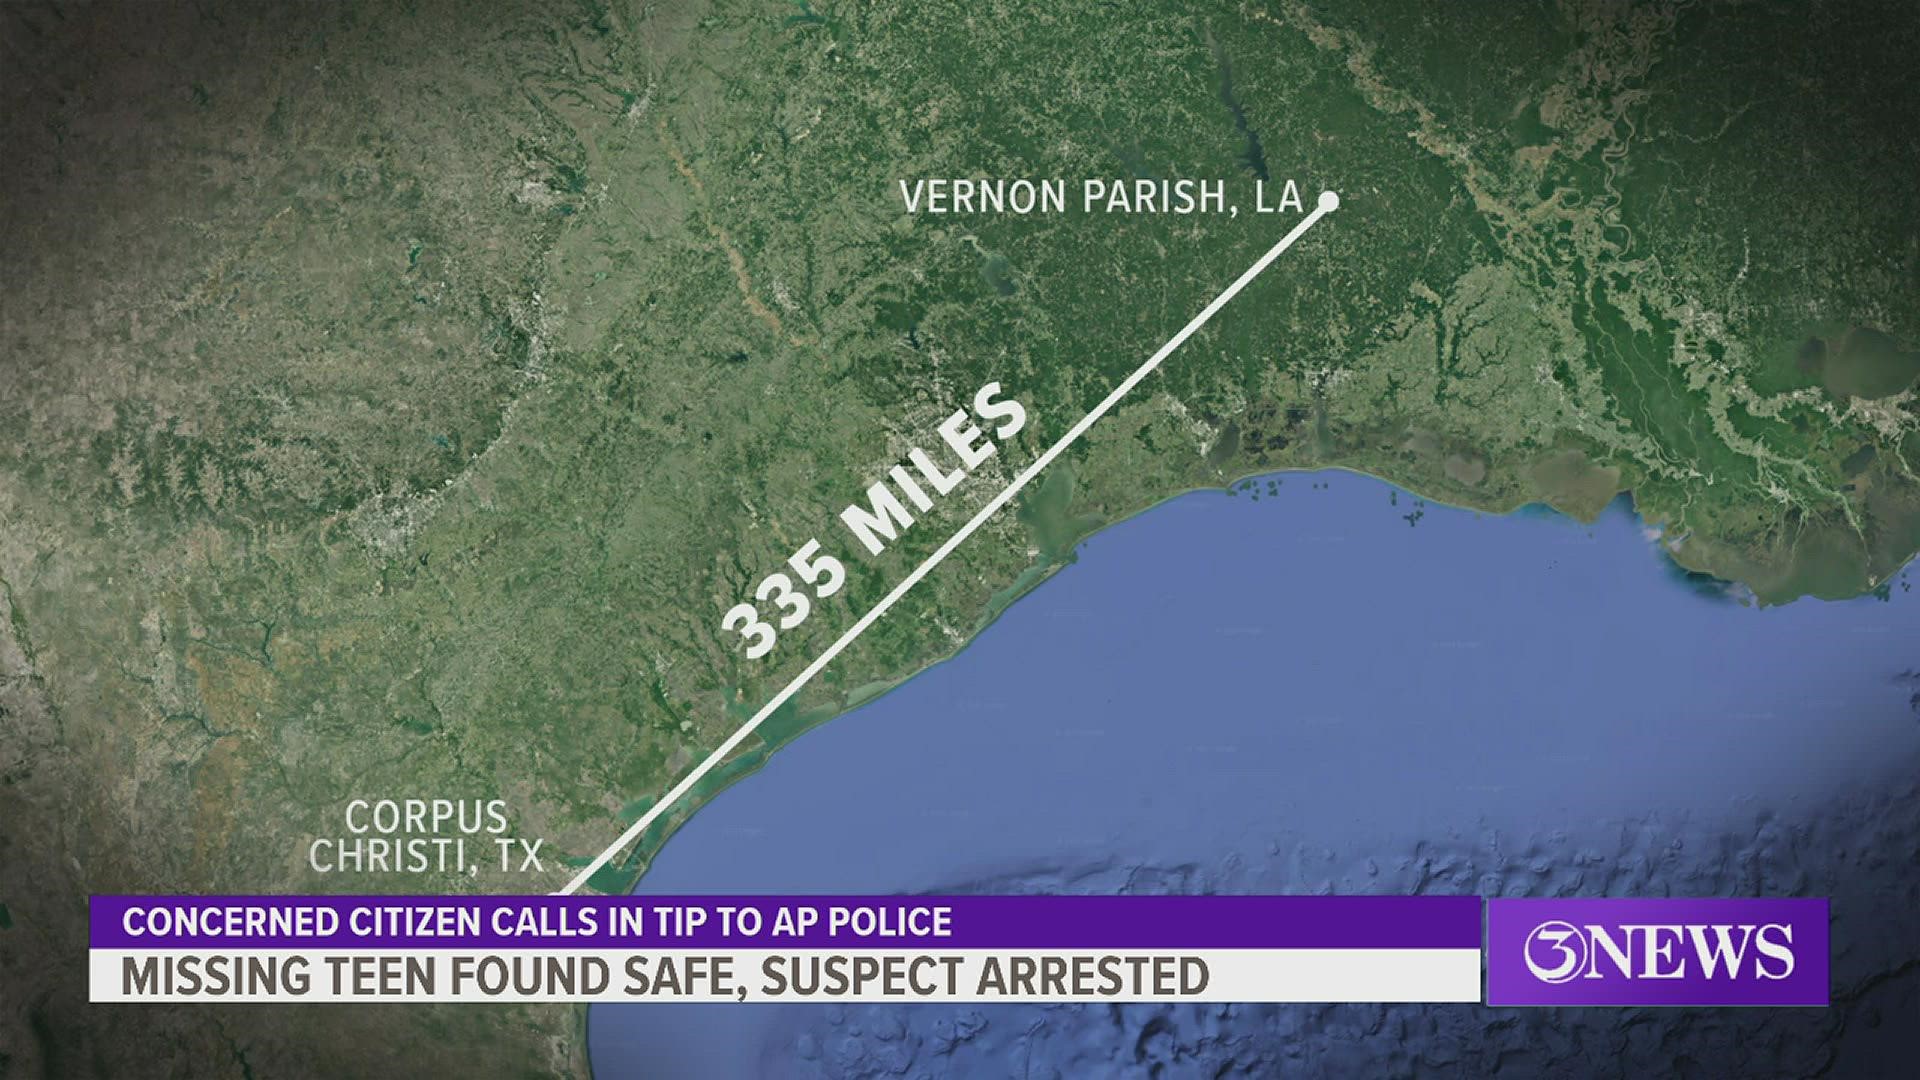 The 14-year-old girl was found under a bench at an Aransas Pass park, officials said.